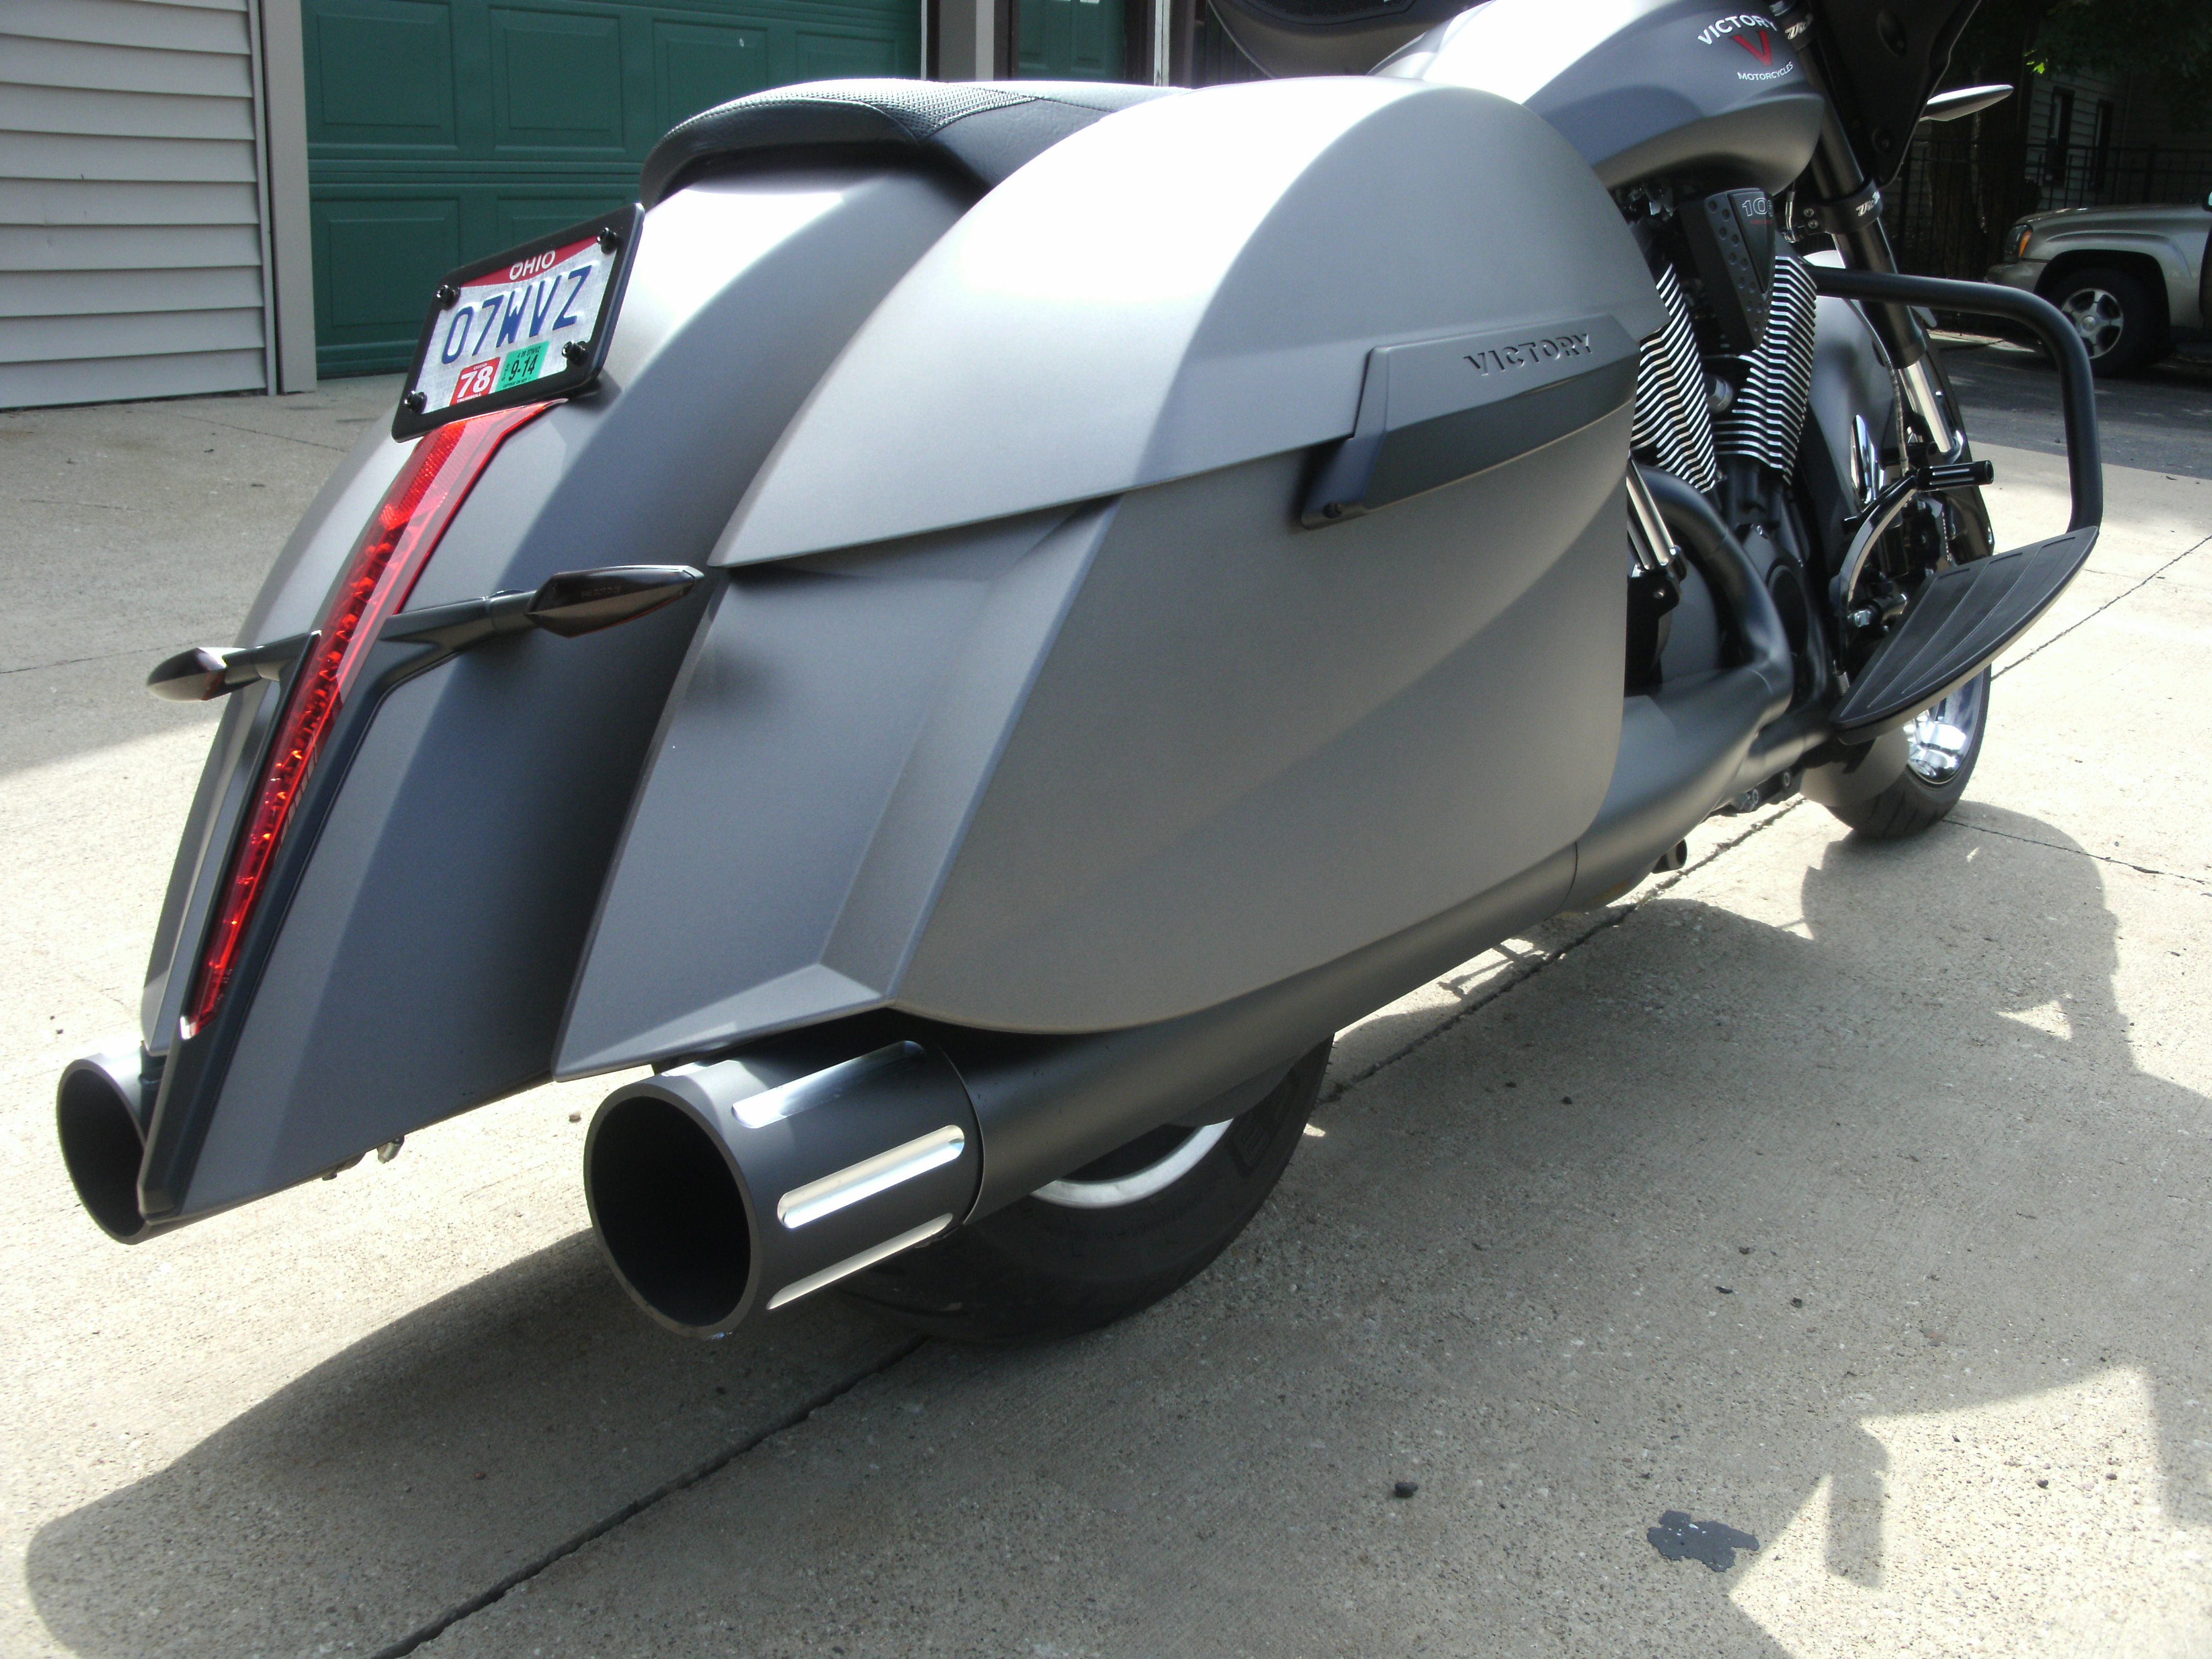 Wide Slot Exhaust tips from Witchdoctors - Victory Motorcycle Parts